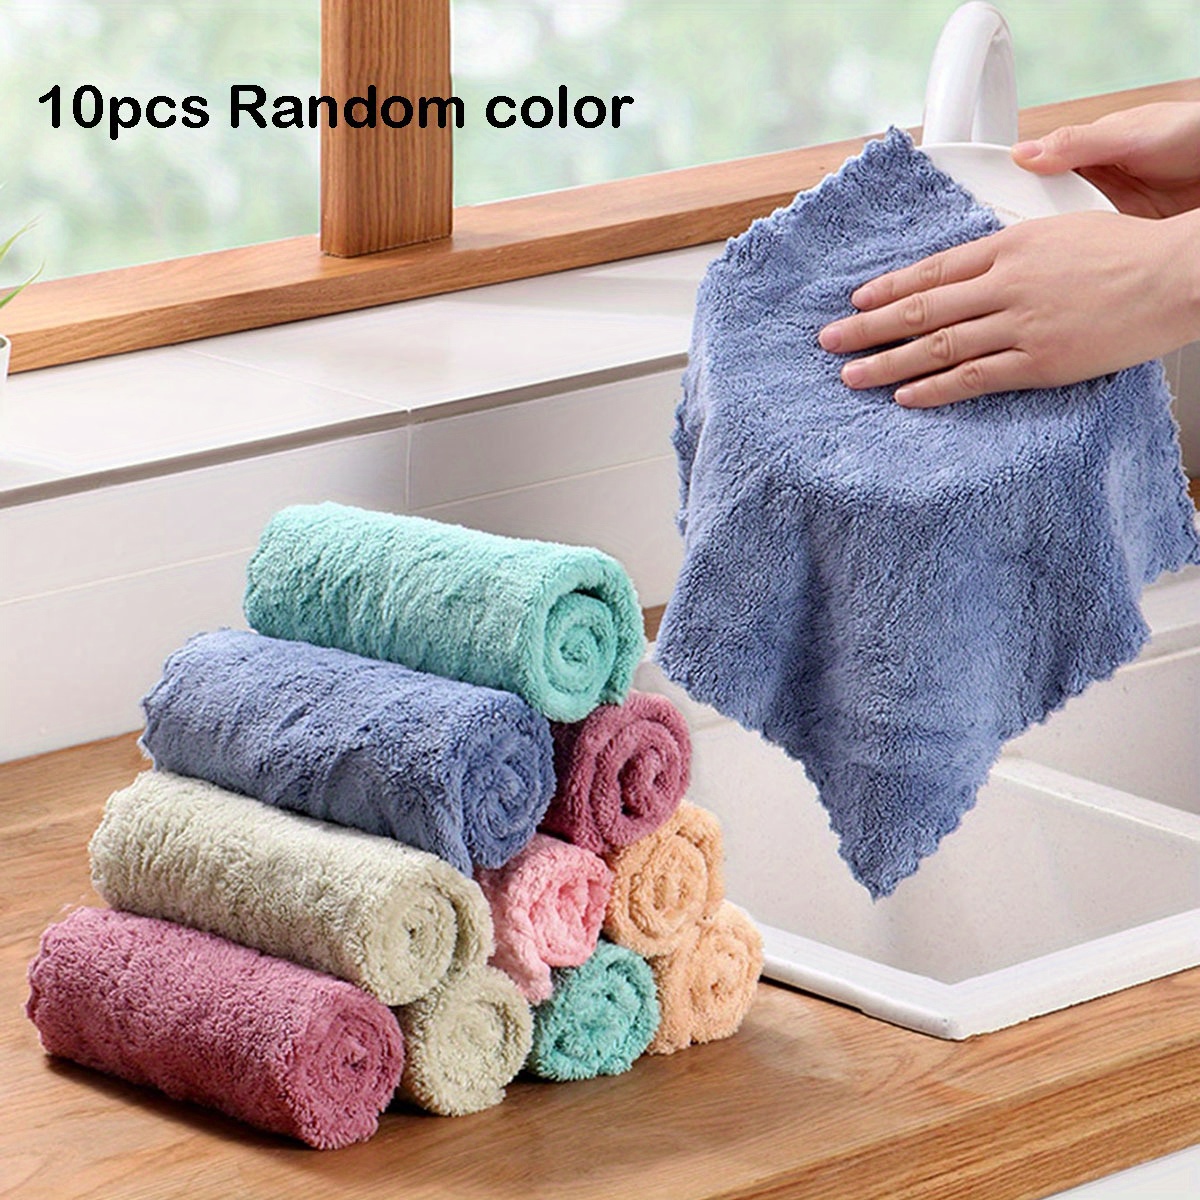 10pcs Pp Fiber Dish Towels, Kitchen Cleaning Cloths For Washing